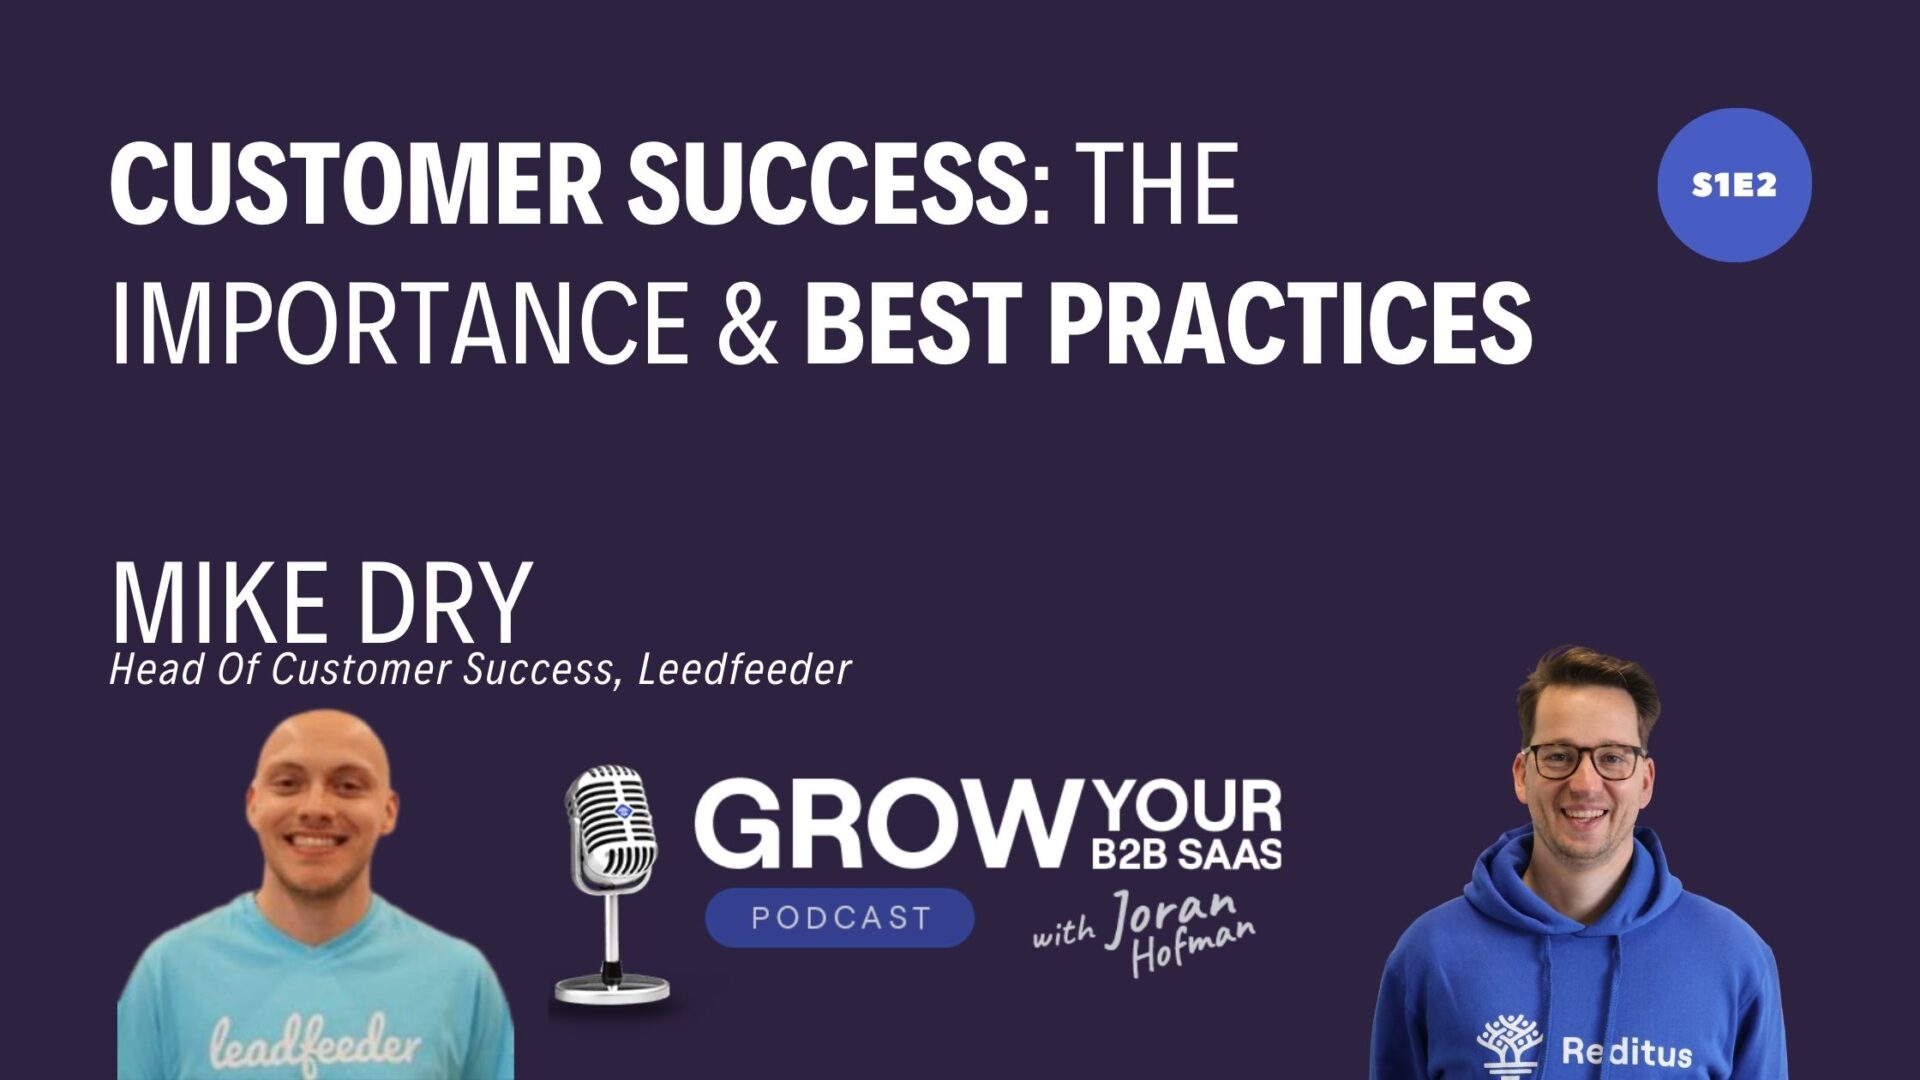 https://www.getreditus.com/podcast/s1e2-customer-success-the-importance-and-best-practices-with-mike-dry/